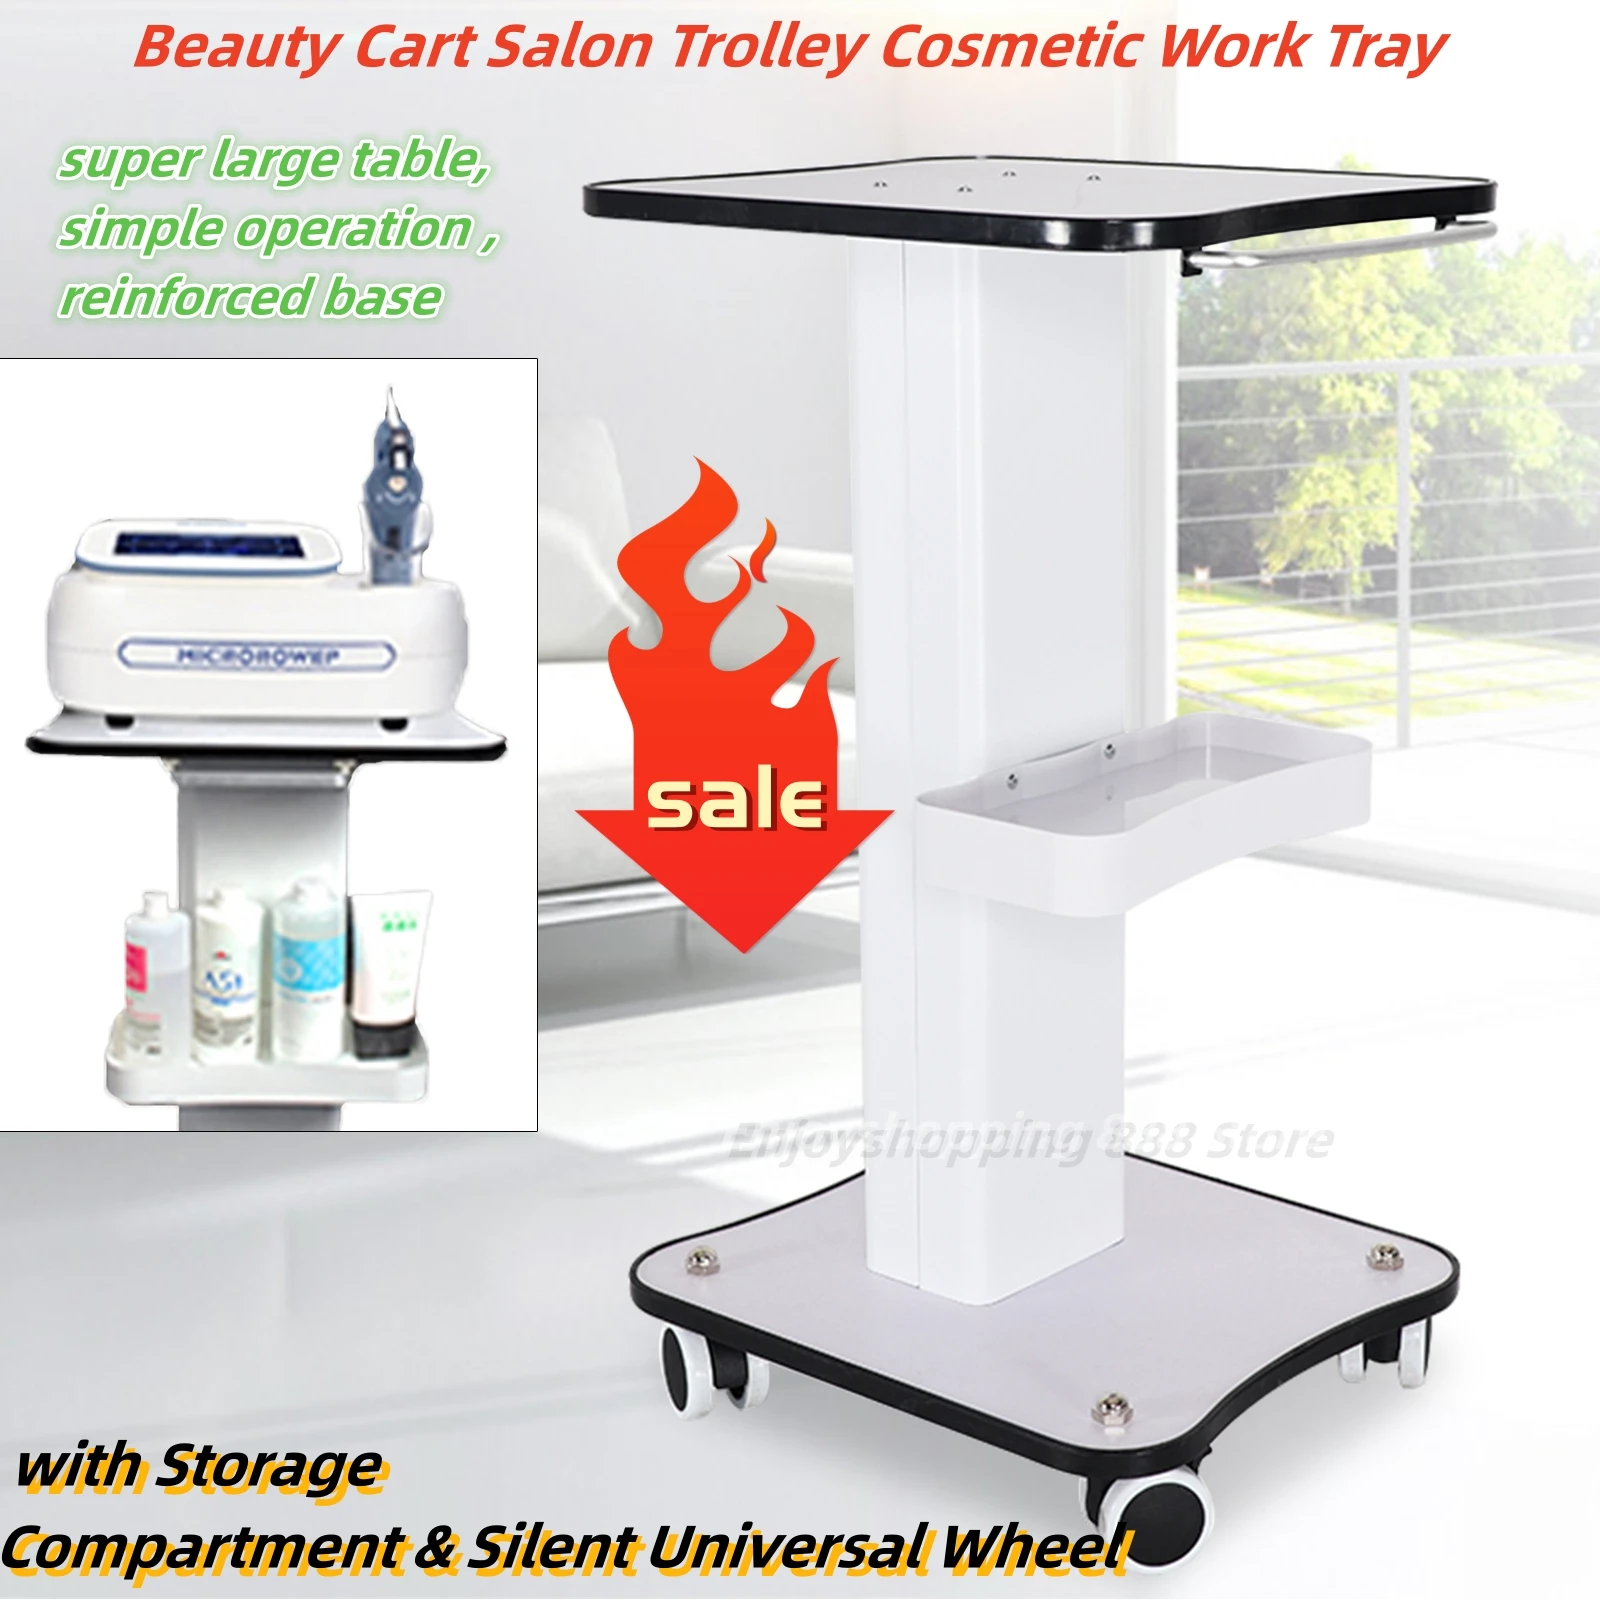 Beauty Cart Salon Trolley Cosmetic Work Tray with Storage Compartment & Silent Universal Wheel 4 packs 3 inch screw universal brake dining wheel rubber casters trolley silent wheels furniture